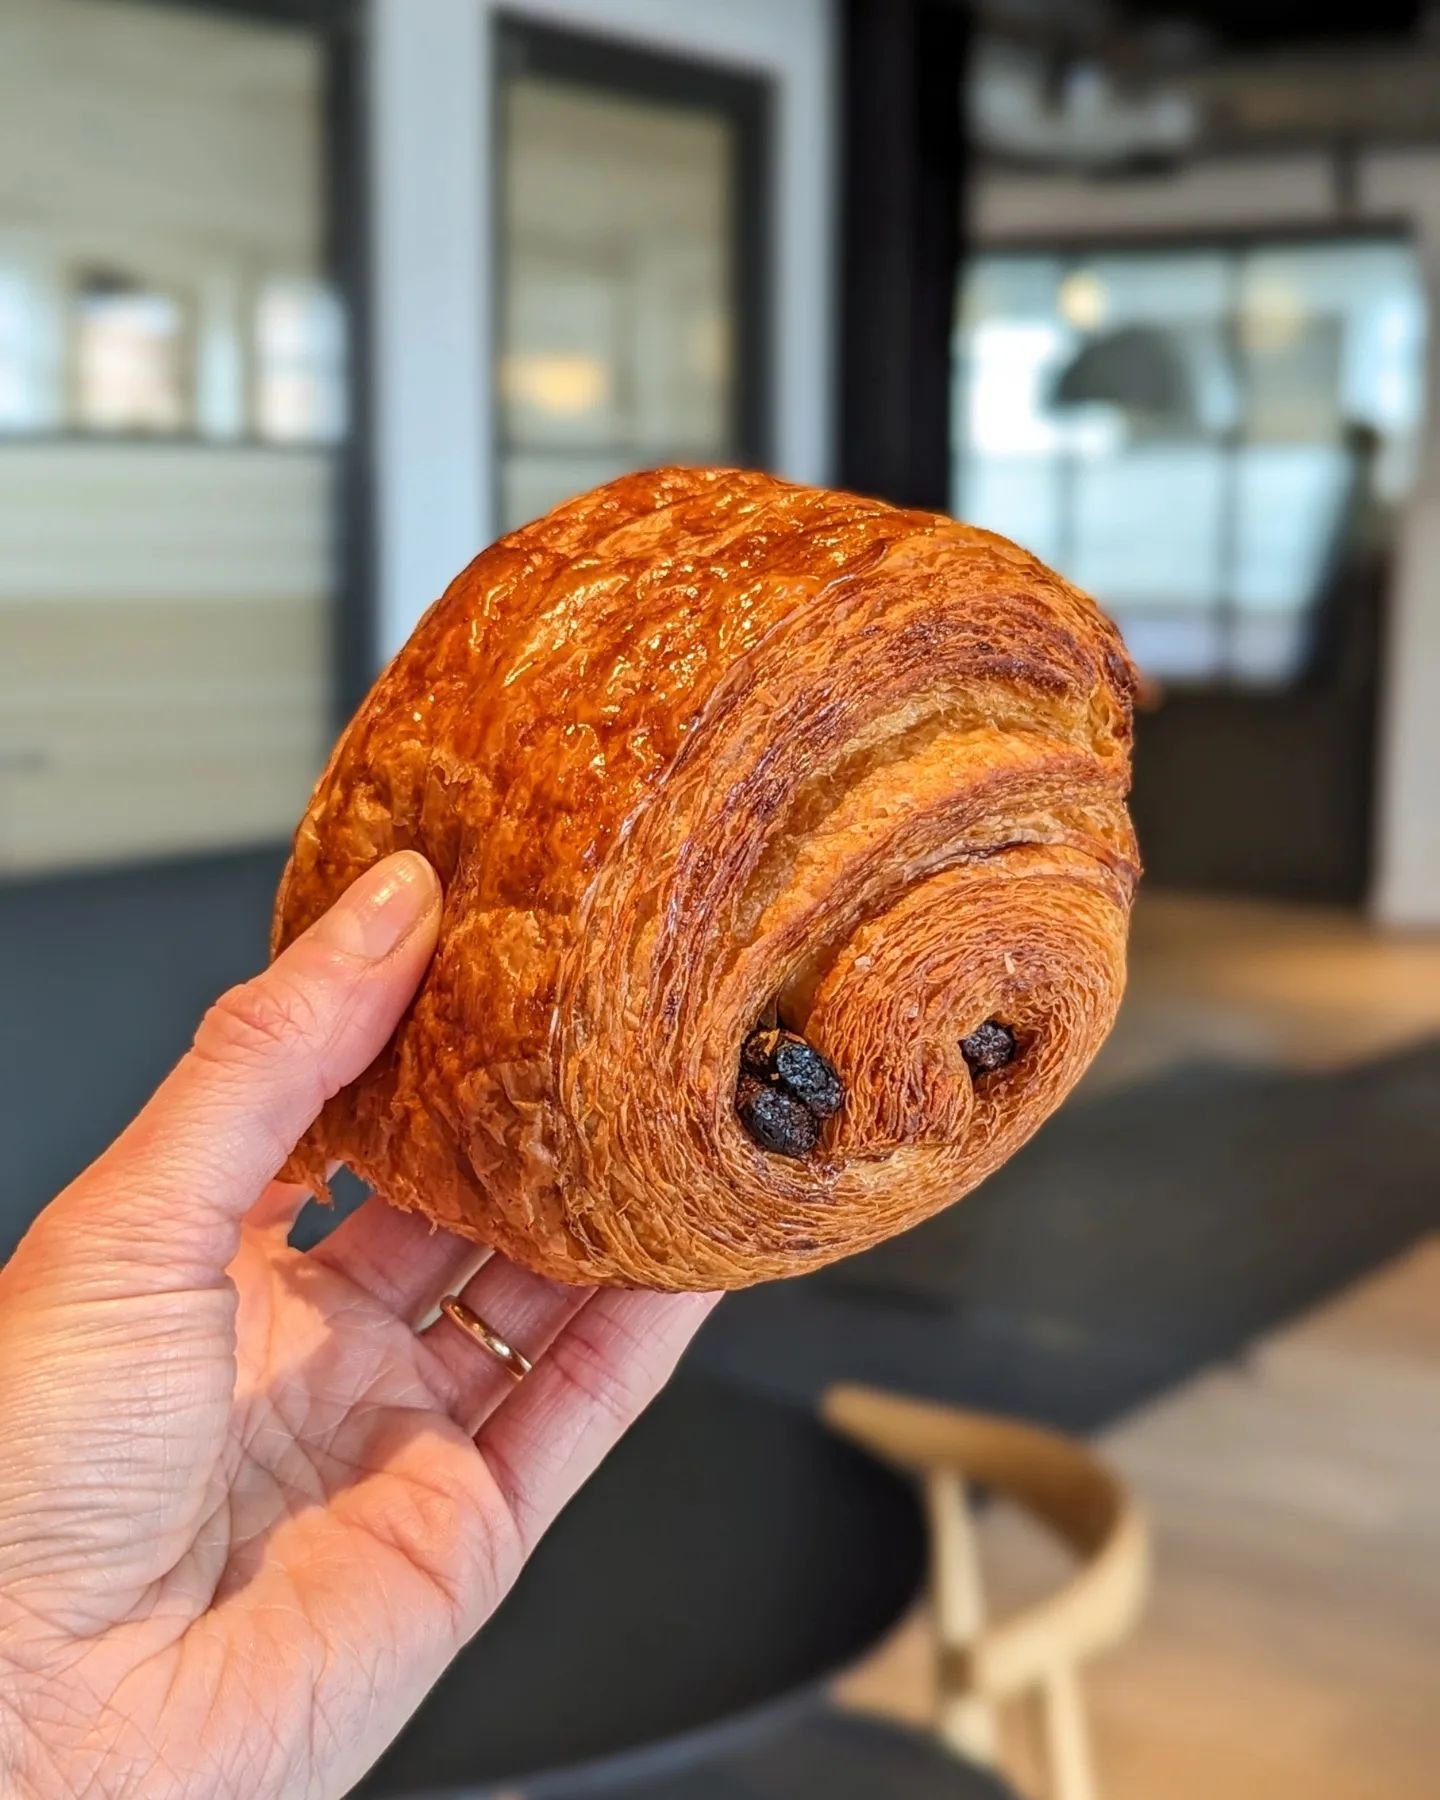 Get yourself work pals who bring you pastries @chromagb 🥐

It may be a cliche but the people you surround yourself with really are important. Every 3rd Thursday of the month I spend the day co-working with my @the_northern_affinity pals in Leeds. It